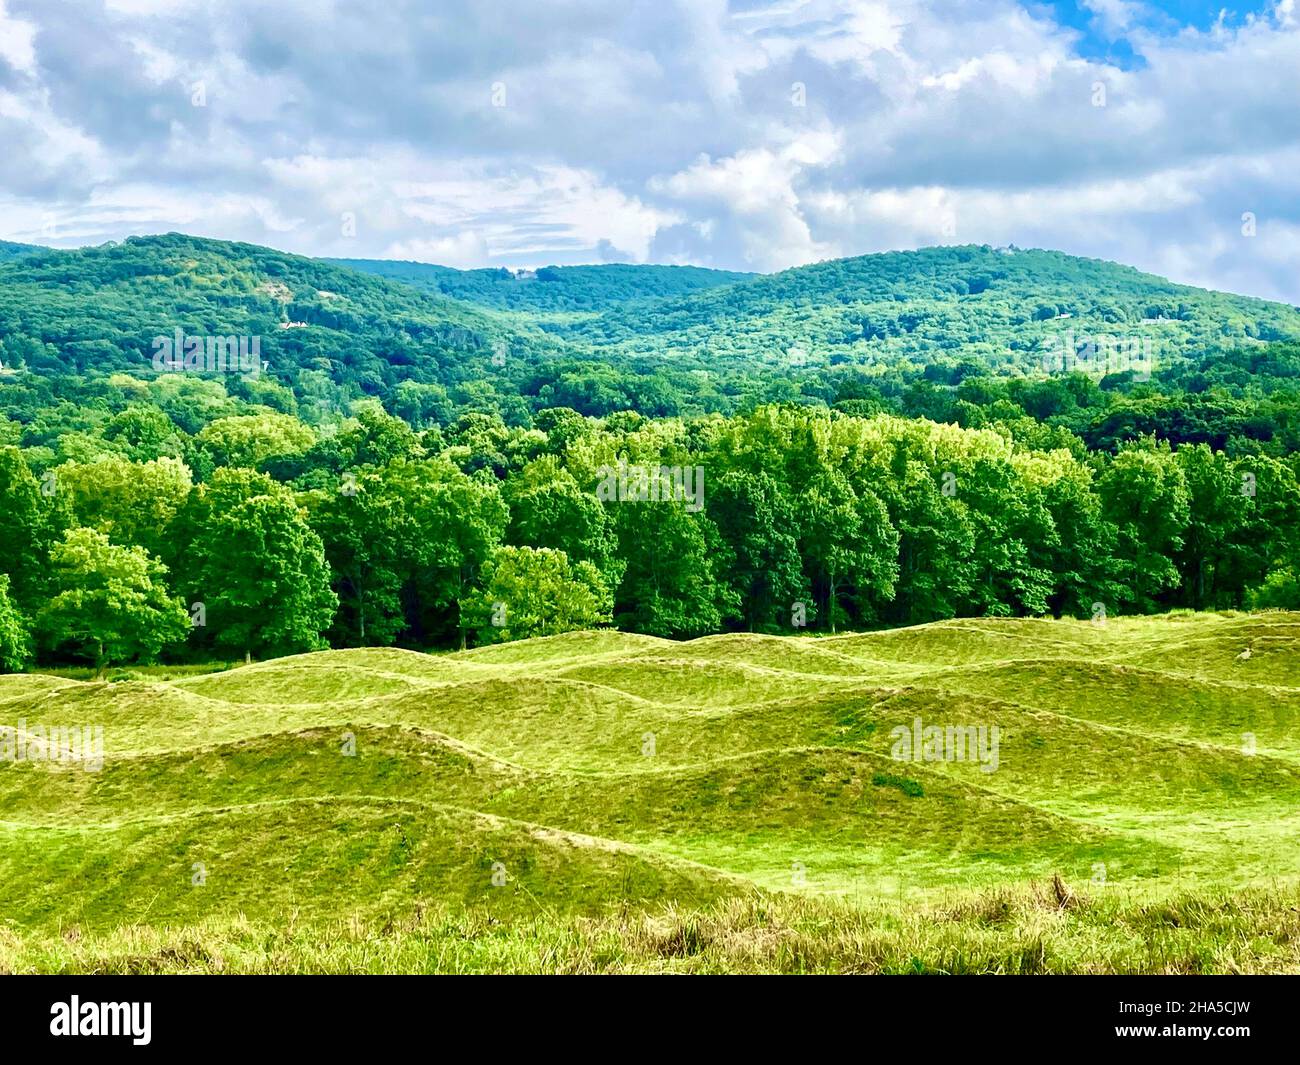 storm king art center,new windsor,ny. 'wavefield' earth sculpture by maya lin corresponds with surring catskill mountains hills Stock Photo